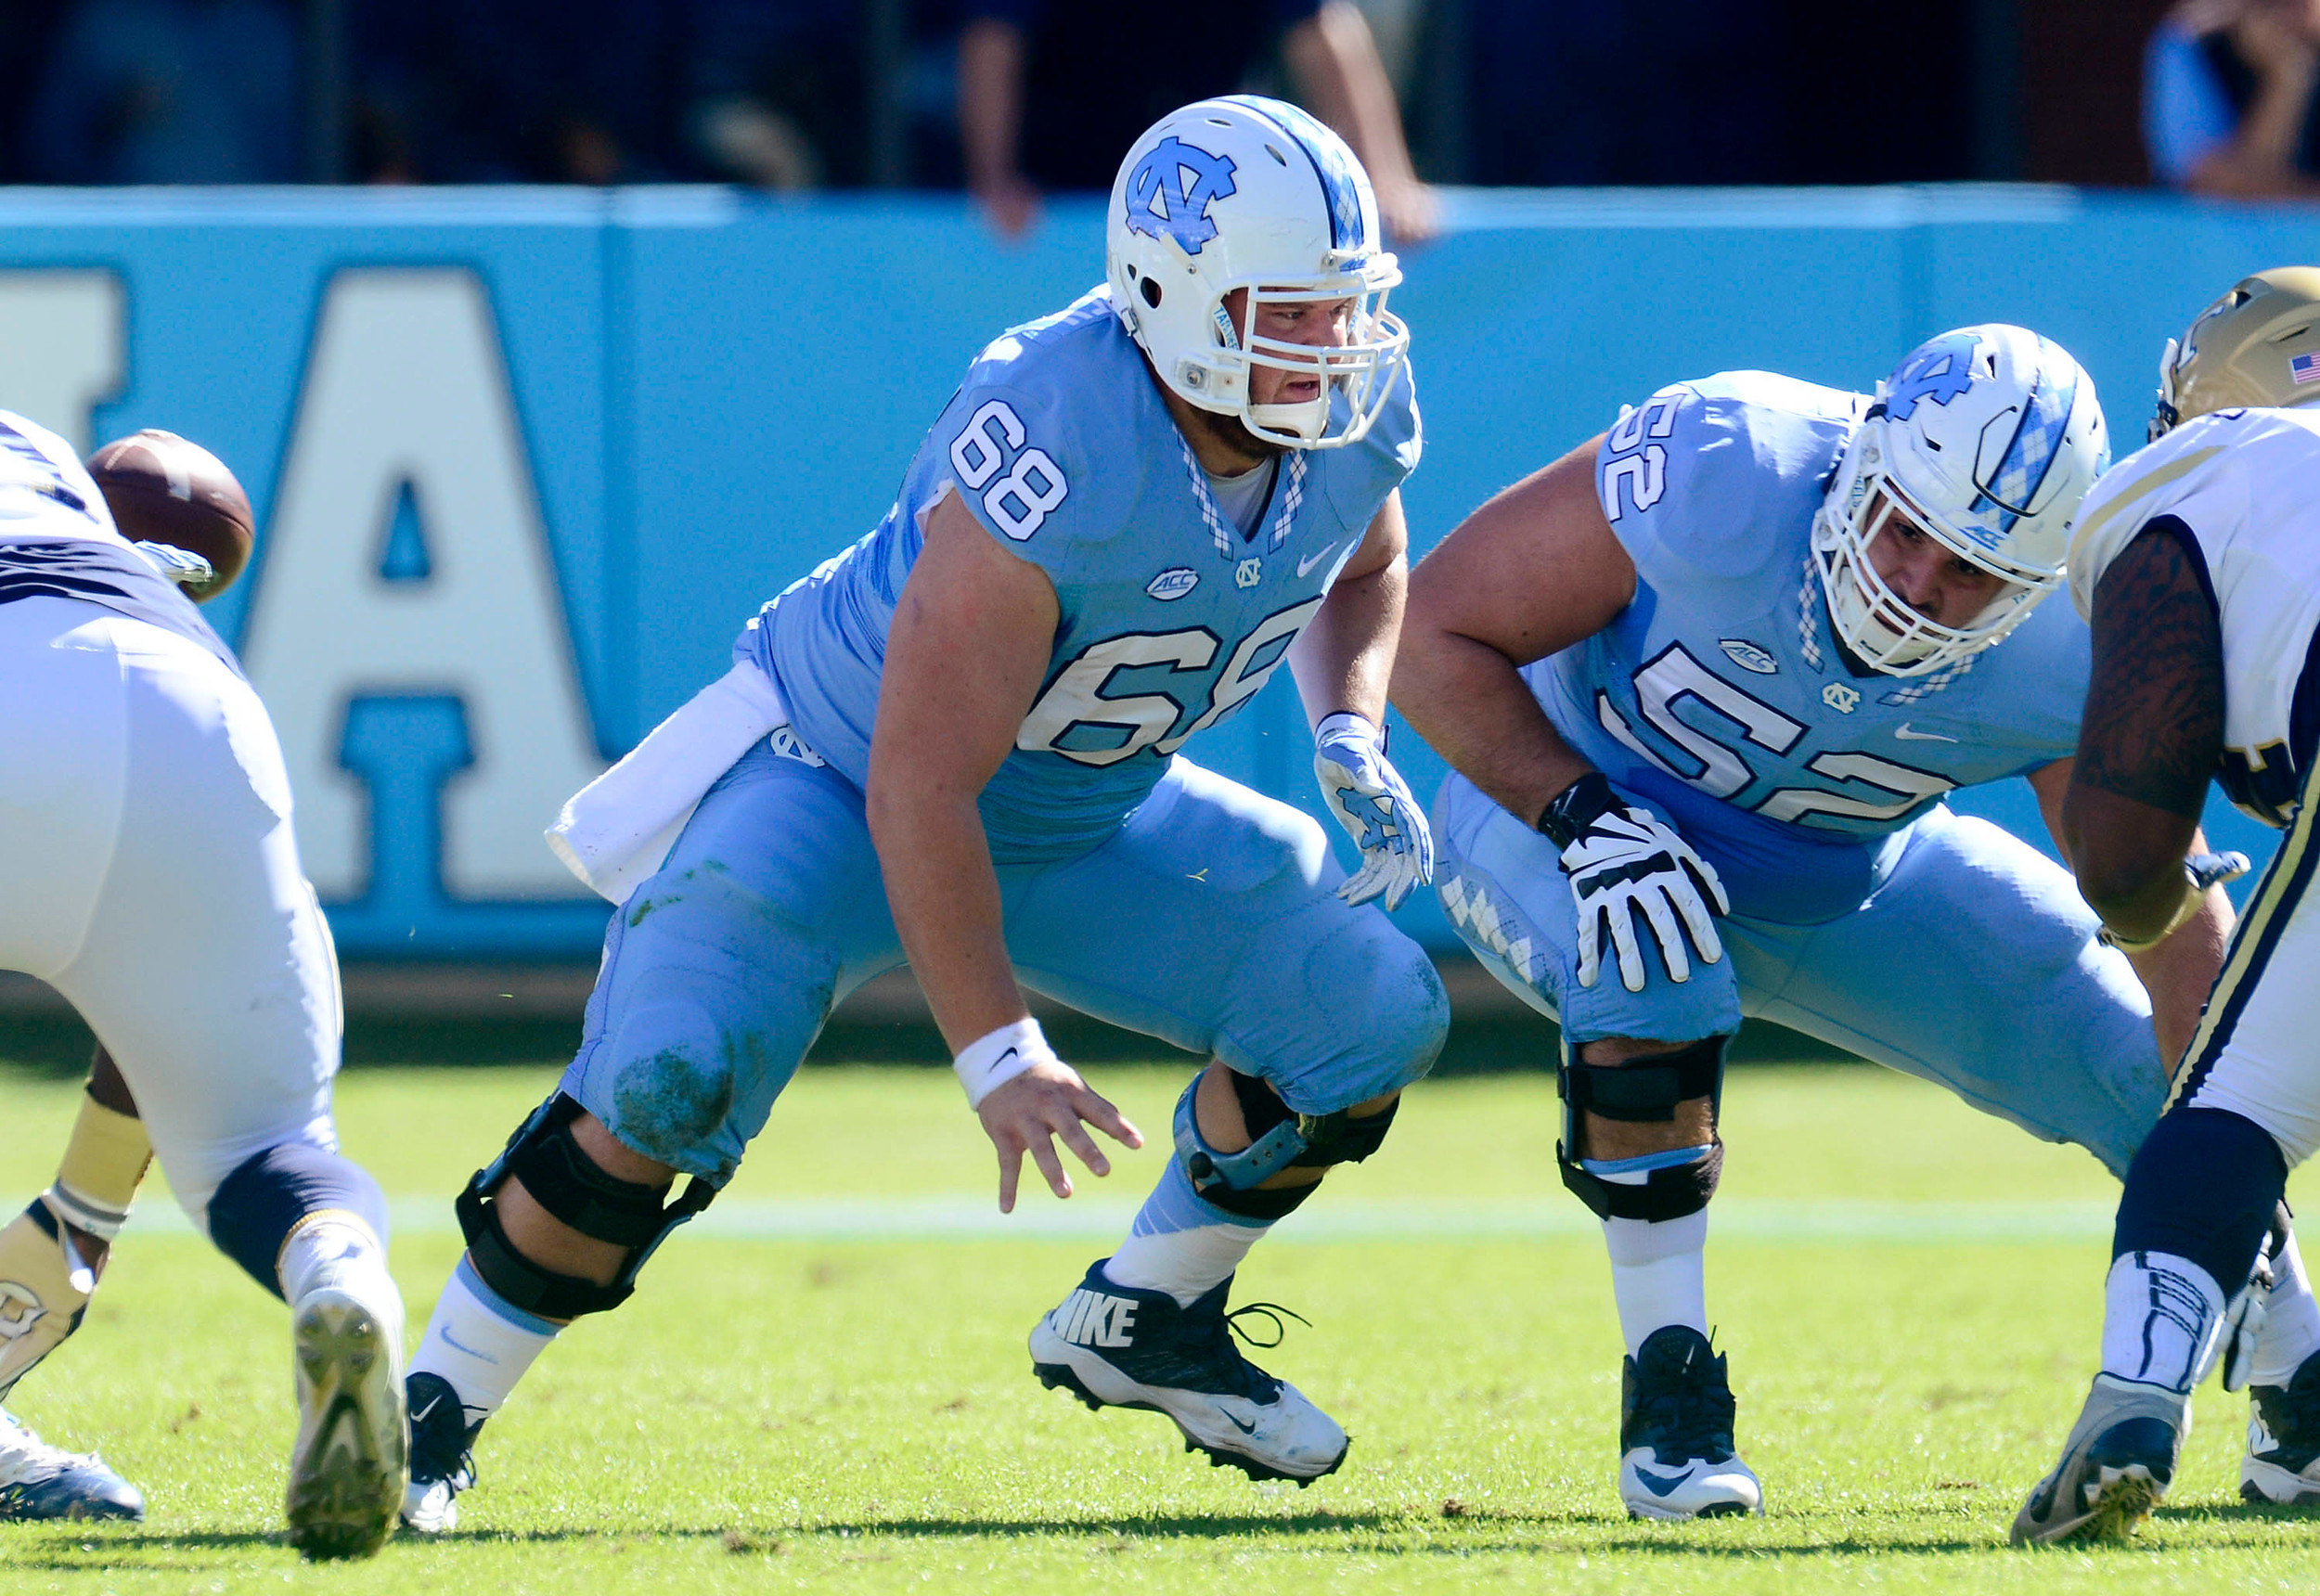 North Carolina center and former Nease player Lucas Crowley (#68) Sept. 17 against James Madison University.